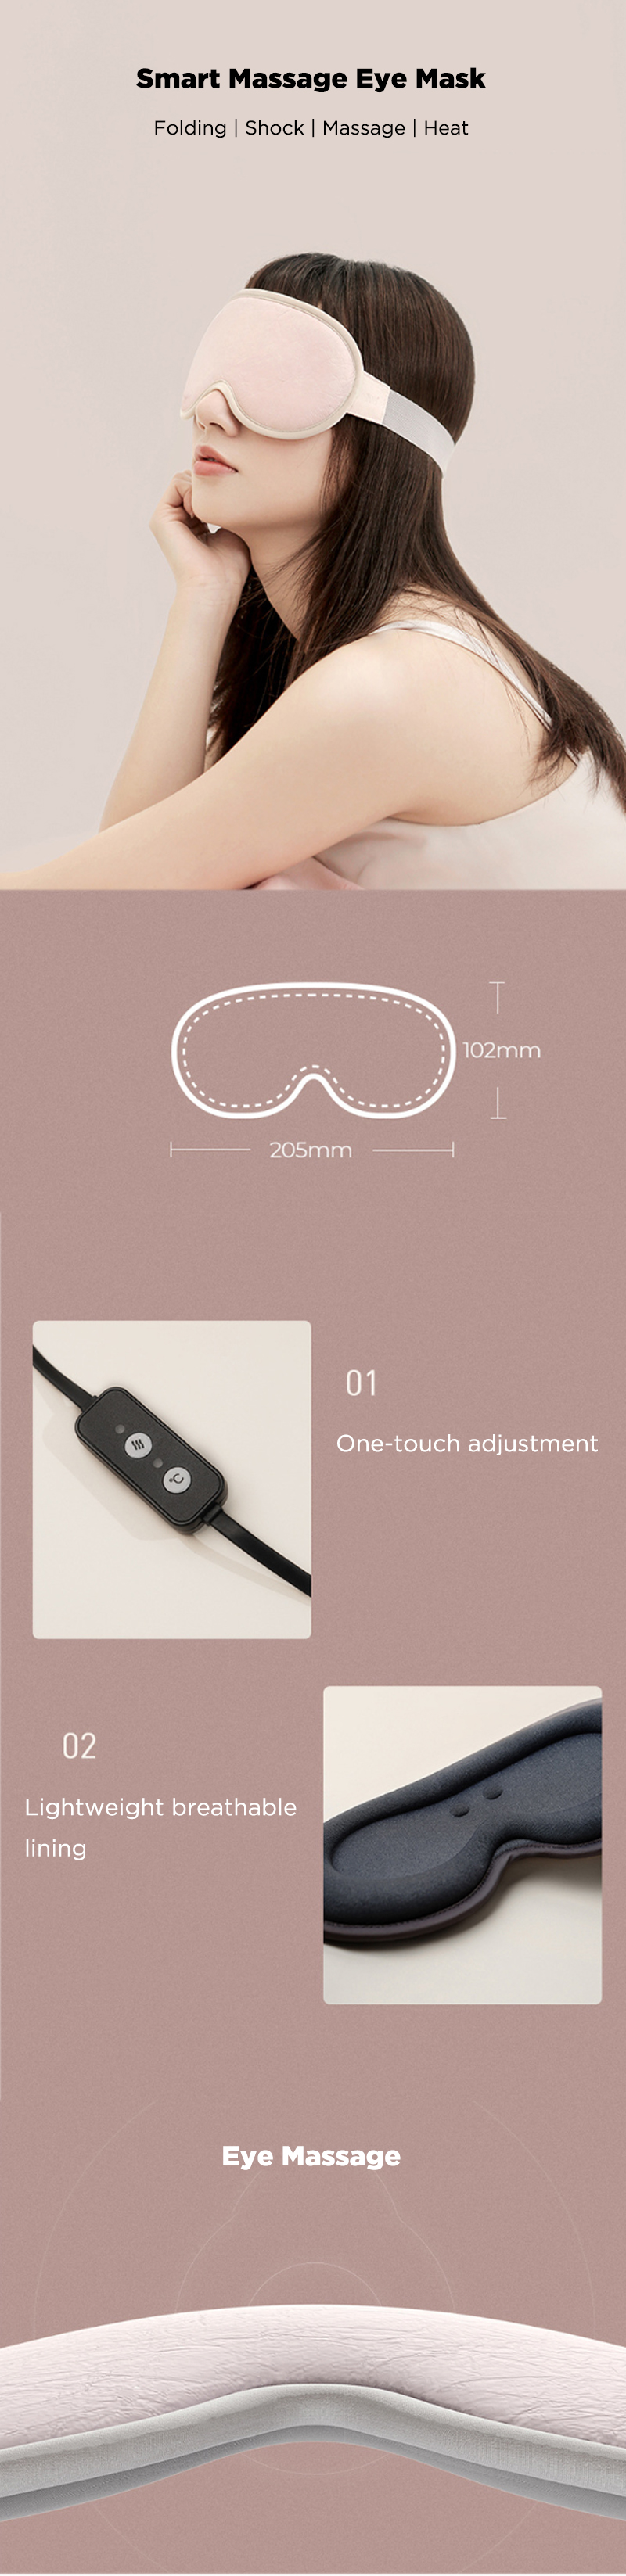 Smart-Eye-Patch-Breathable-Sleep-USB-Rechargeable-5-Massage-Modes-3-Temperature-Adjustment-Modes-Tra-1643876-1